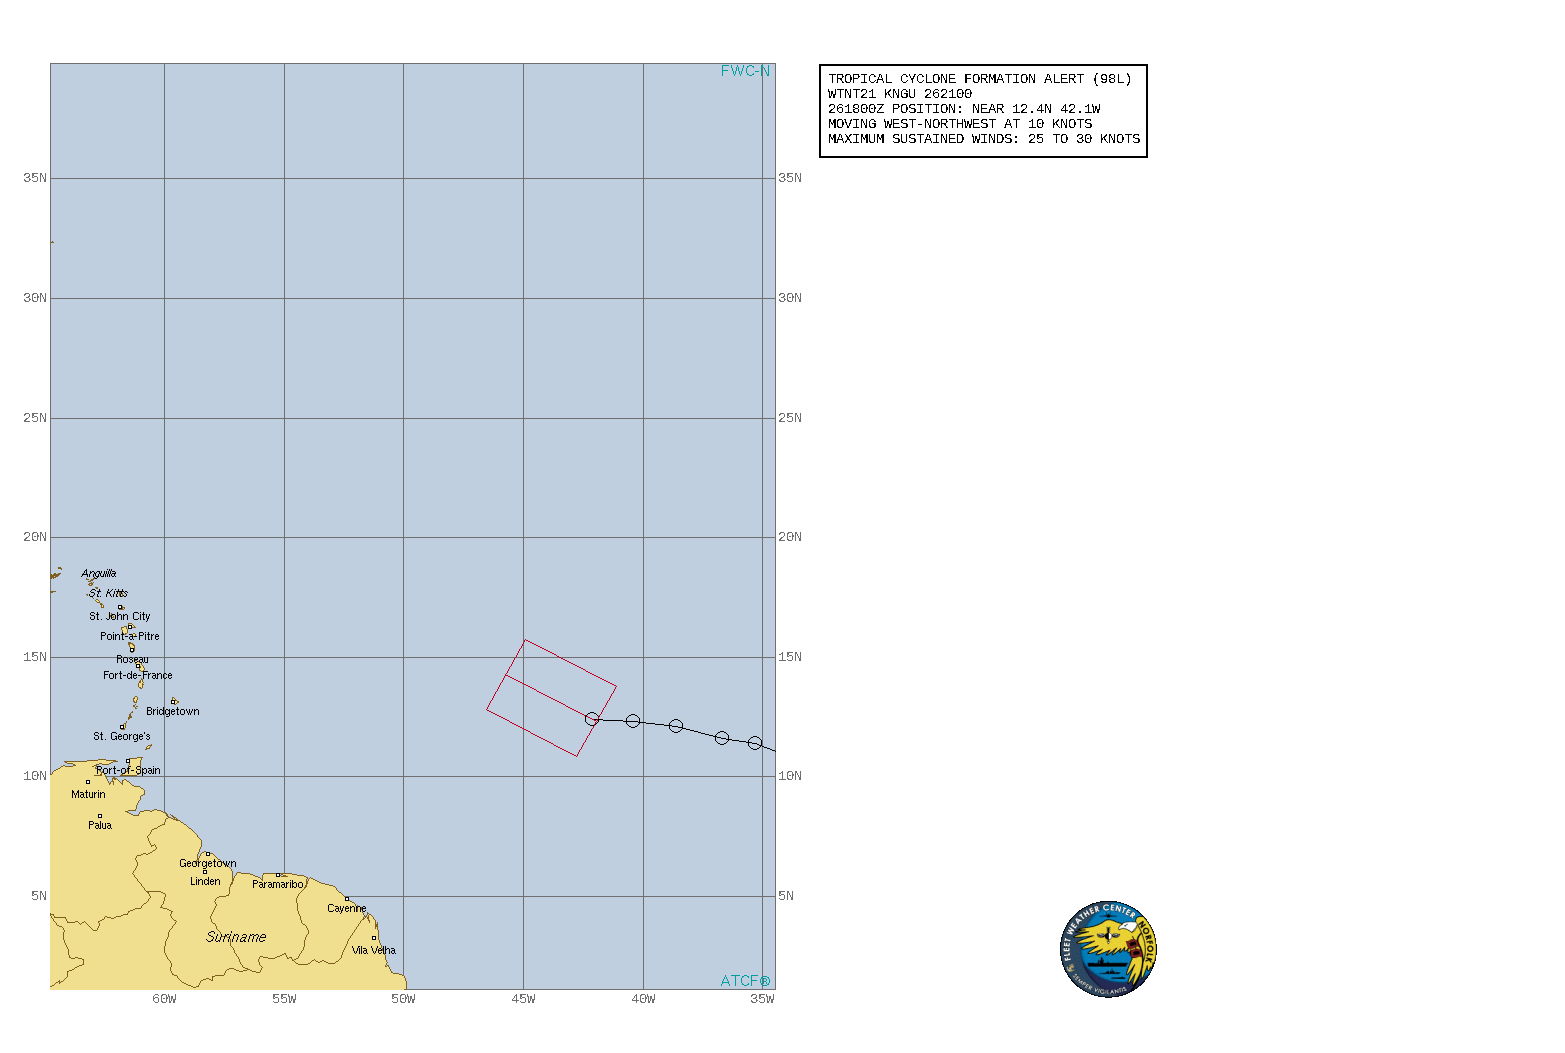 INVEST 98L. TROPICAL CYCLONE FORMATION ALERT ISSUED AT 26/21UTC.FORMATION OF A SIGNIFICANT TROPICAL CYCLONE IS POSSIBLE WITHIN 100 NM EITHER SIDE OF A LINE FROM 12.4N 42.1W TO 14.3N 45.7W WITHIN THE NEXT 24 HOURS. AVAILABLE DATA DOES NOT JUSTIFY ISSUANCE OF NUMBERED TROPICAL CYCLONE WARNINGS AT THIS TIME. WINDS IN THE AREA ARE ESTIMATED TO BE 25 TO 30 KNOTS. METSAT IMAGERY AT 261800Z INDICATES THAT A CIRCULATION CENTER IS LOCATED NEAR 12.4N 42.1W. THE SYSTEM IS MOVING WEST-NORTHWEST AT 8-12 KNOTS. 2. REMARKS: A VIGOROUS TROPICAL WAVE, SITUATED ABOUT MIDWAY BETWEEN THE CABO VERDE ISLANDS AND THE WINDWARD ISLANDS IS PRODUCING A LARGE AREA OF SHOWERS AND THUNDERSTORMS. UPPER LEVEL WINDS ARE FORECAST TO BE FAVORABLE FOR ADDITIONAL CONVECTIVE DEVELOPMENT AND A TROPICAL DEPRESSION IS LIKELY TO FORM DURING THE NEXT 24 HOURS. THE SYSTEM IS EXPECTED TO MOVE WEST-NORTHWEST AND THEN NORTHWEST AT 8-12 KTS DURING THE NEXT SEVERAL DAYS.